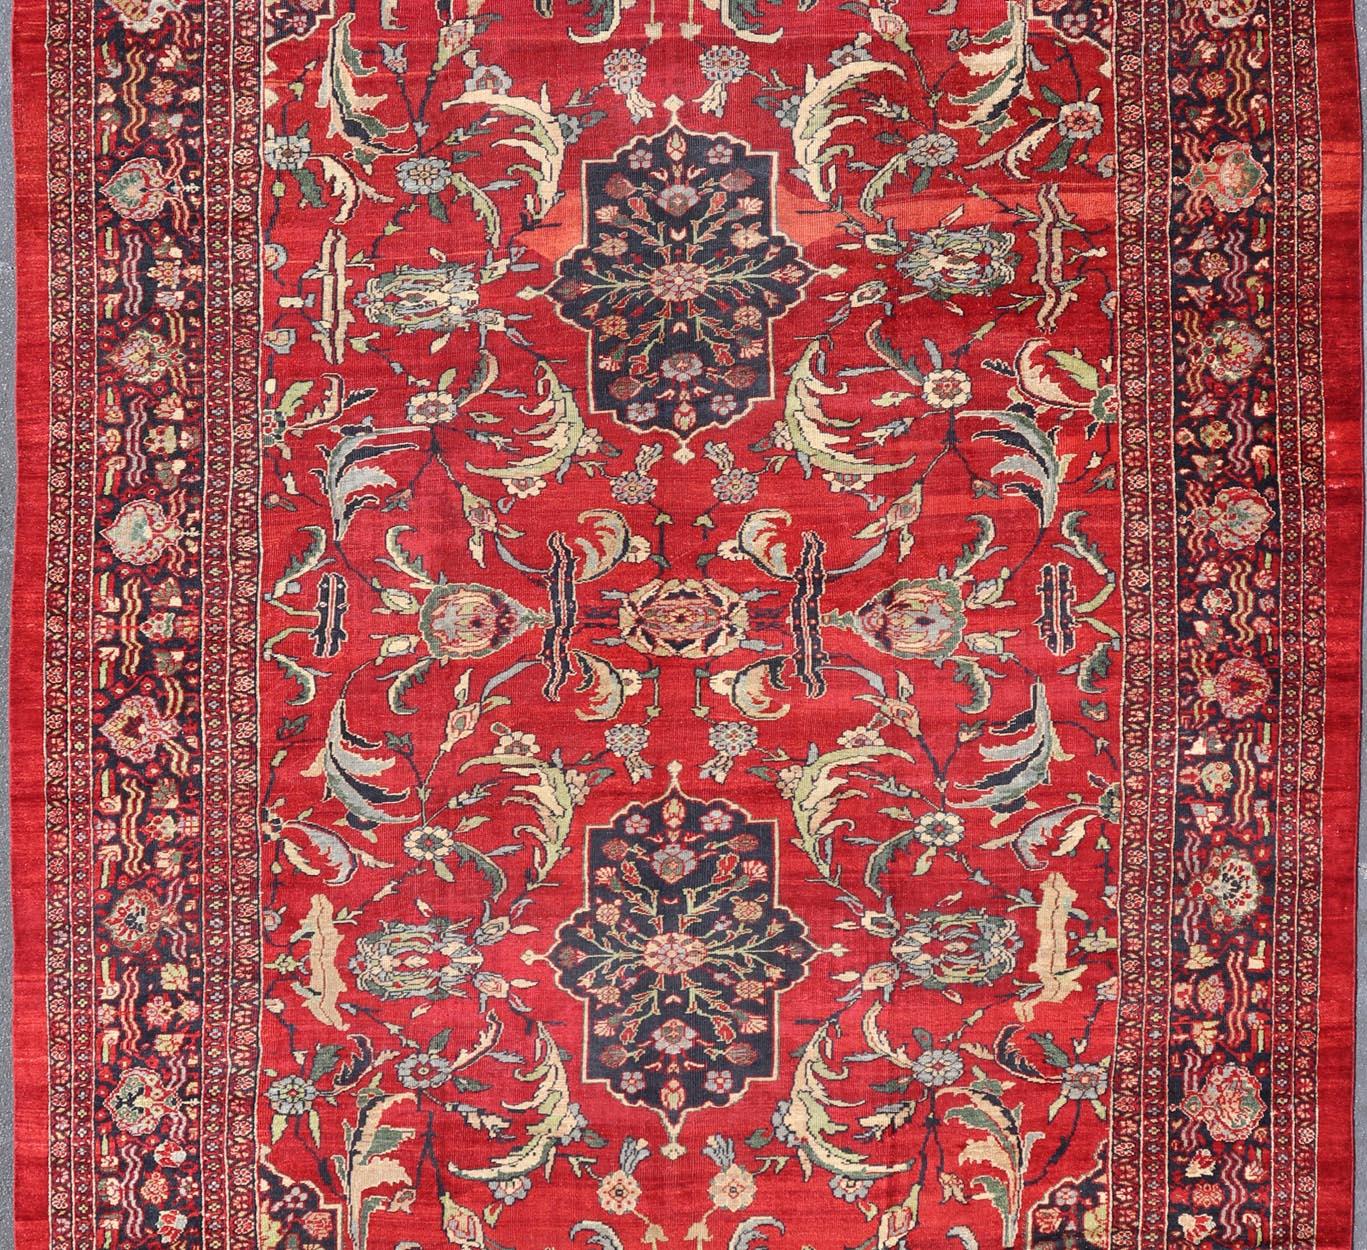 Hand-Knotted Antique Persian Zeigler Sultanabad Rug with Botanical Elements Set on Red Field For Sale